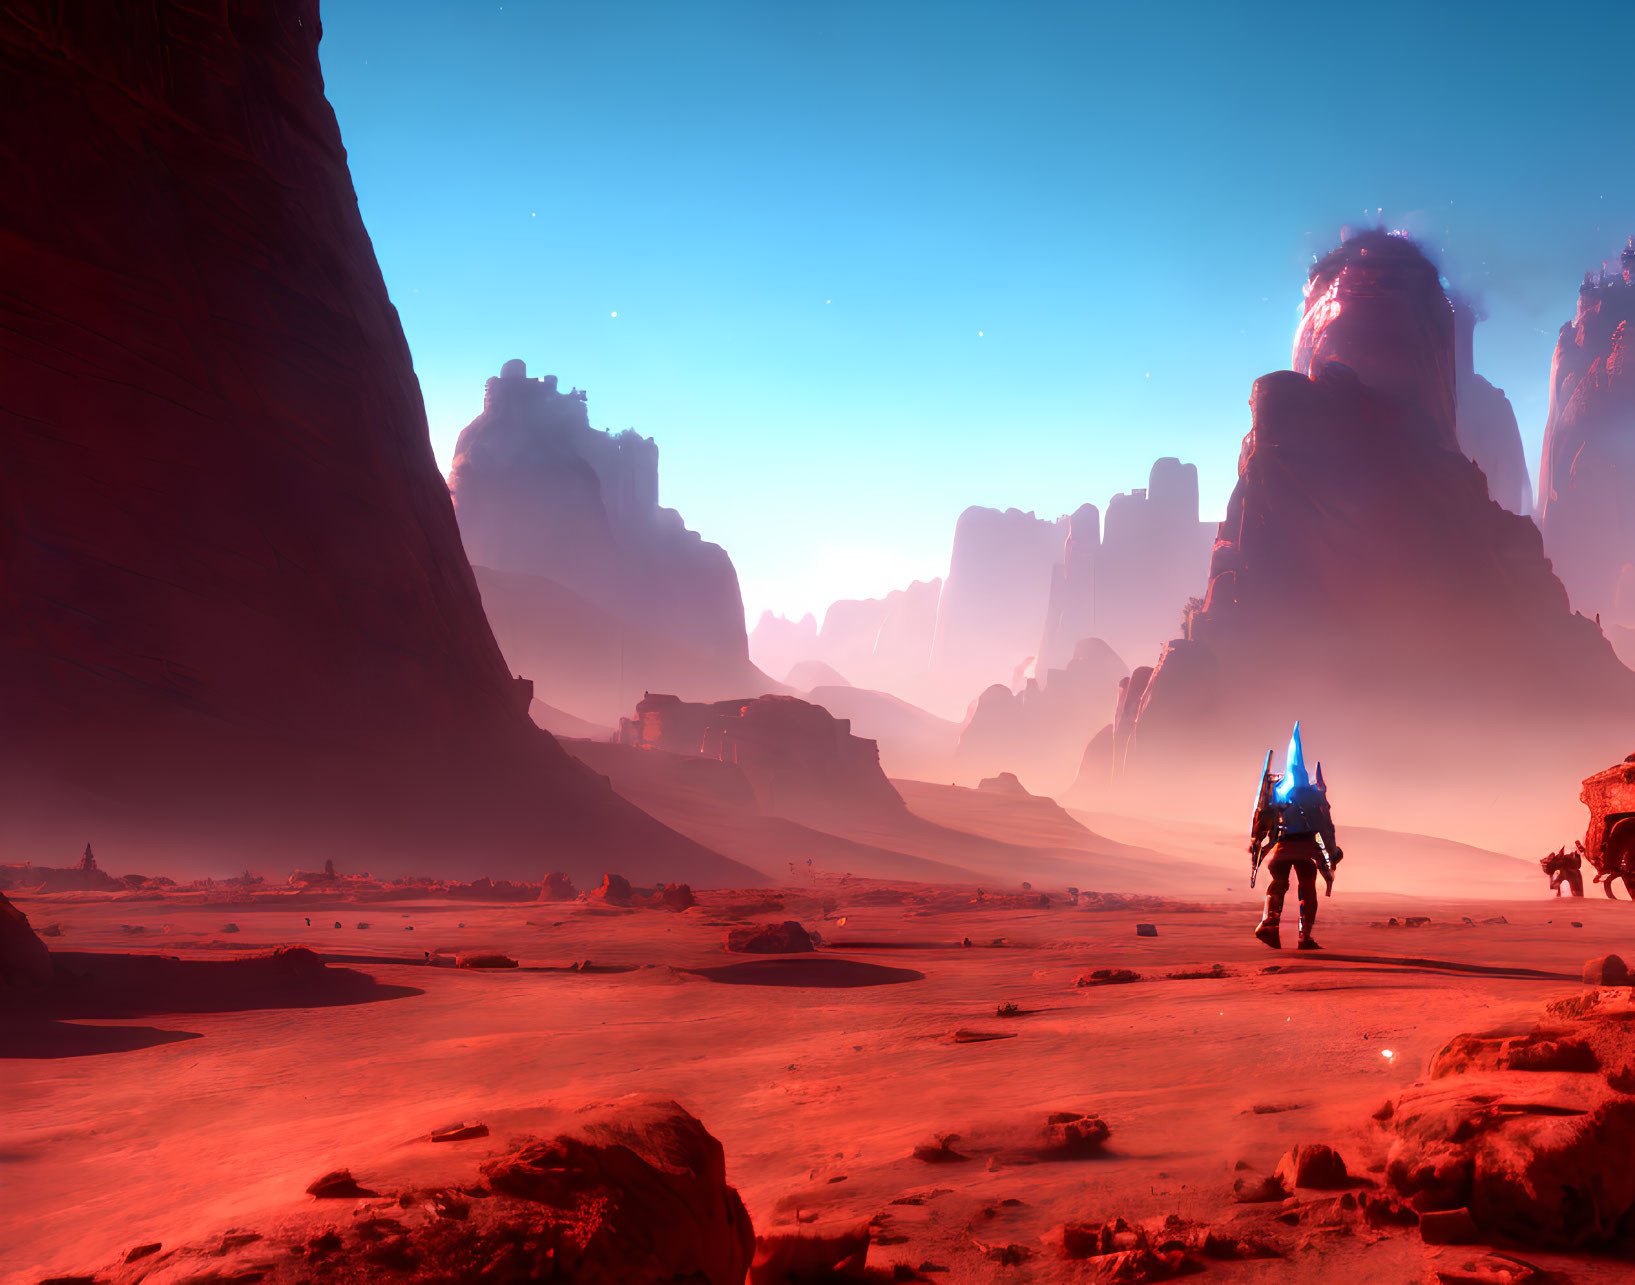 Futuristic figure in red desert with rock formations - alien exploration theme